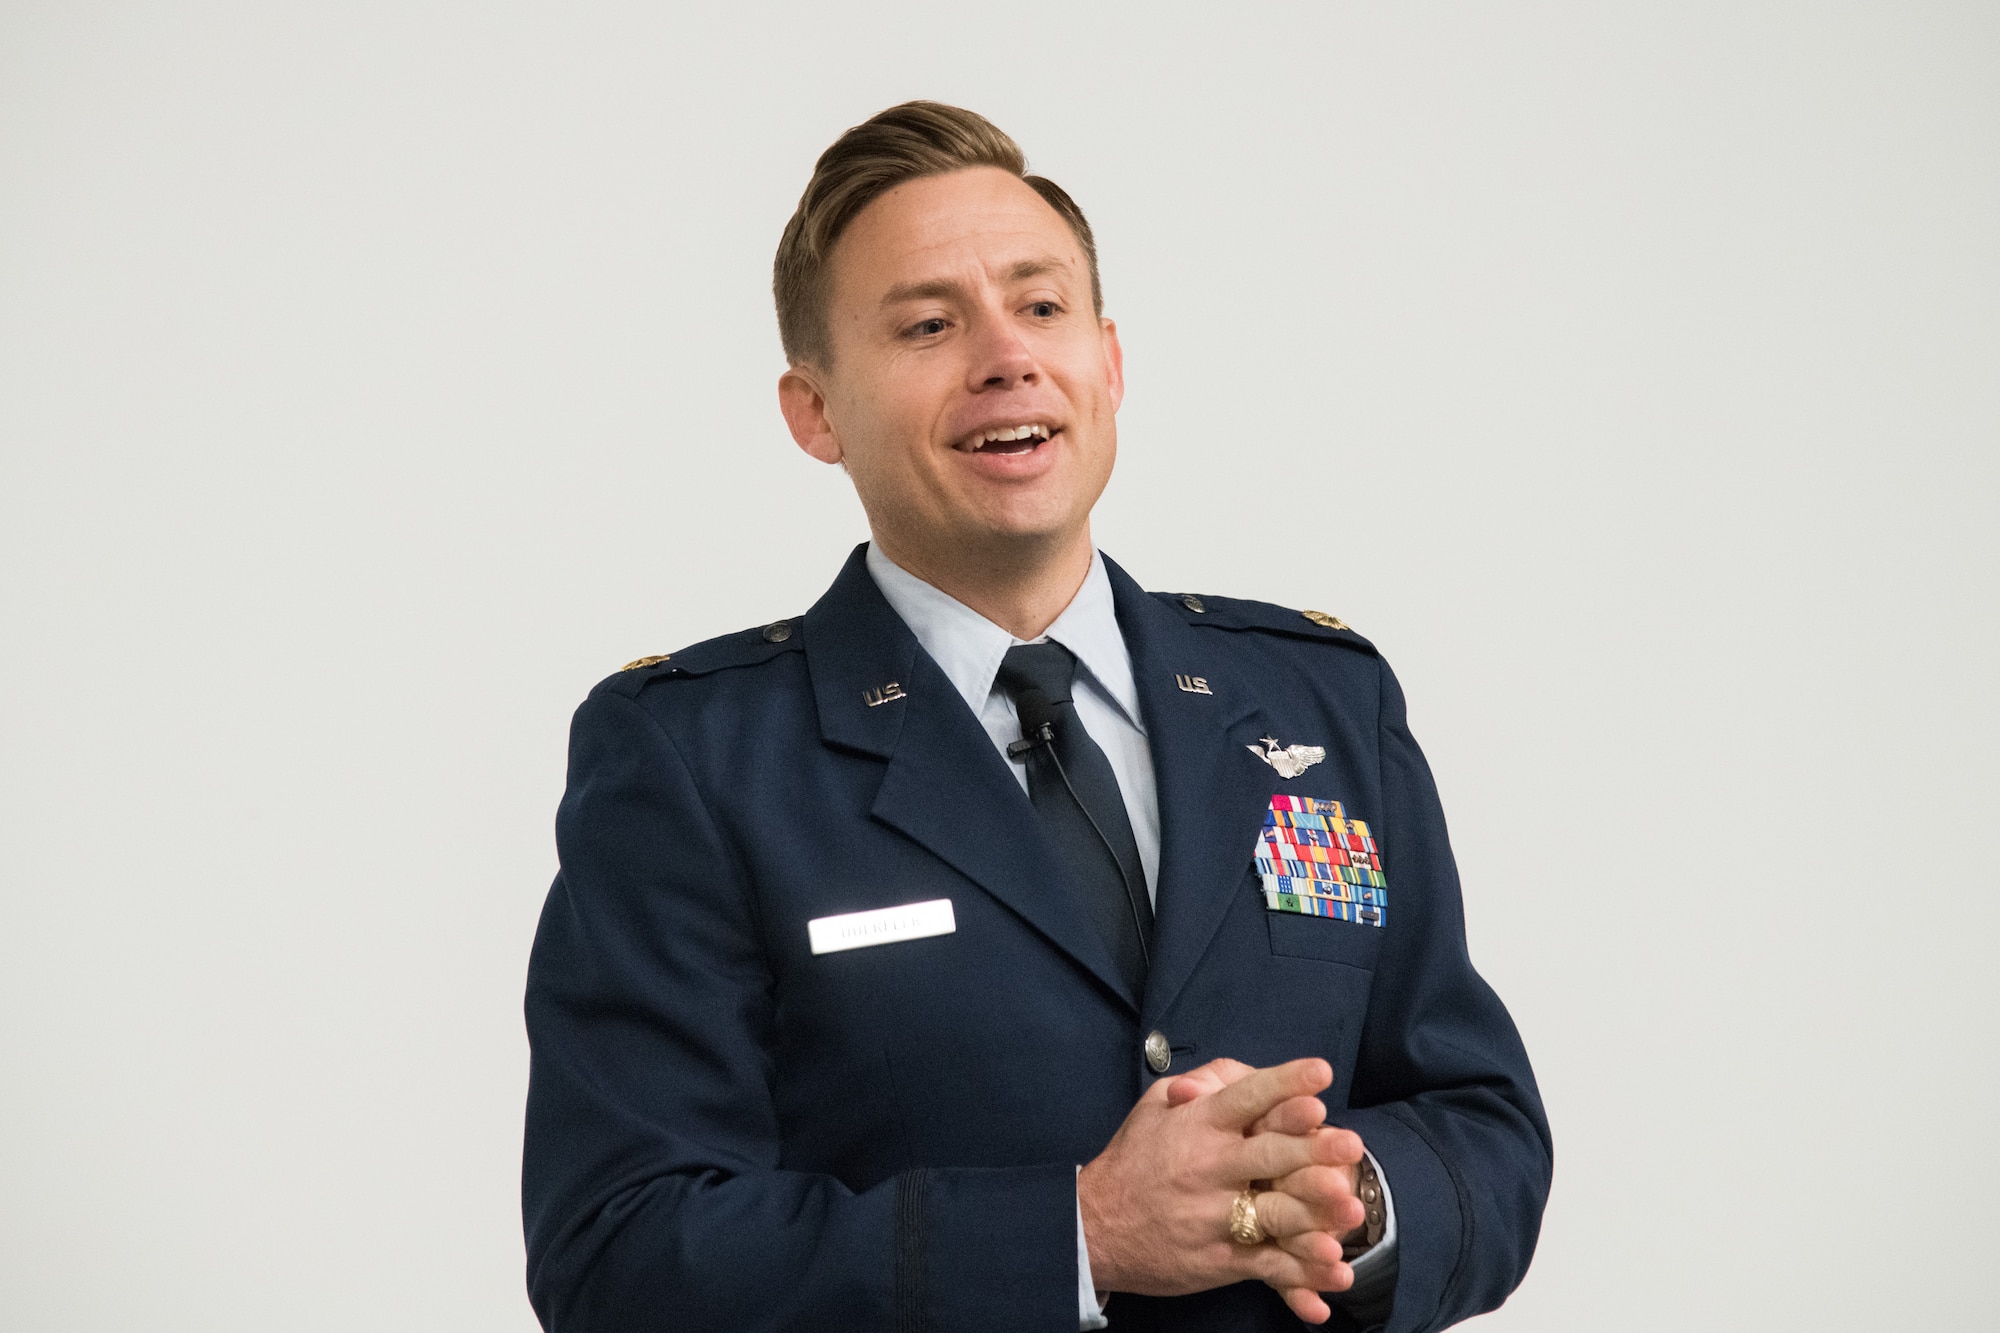 Maj. Jay Burrell Doerfler addressed the participants to his award ceremony at Maxwell Air Force Base’s Wood Auditorium, November 18, 2019. The award is presented annually to recognize an Air Force fighter pilot with proven excellence and professionalism in flight, as well as dedication to community service.